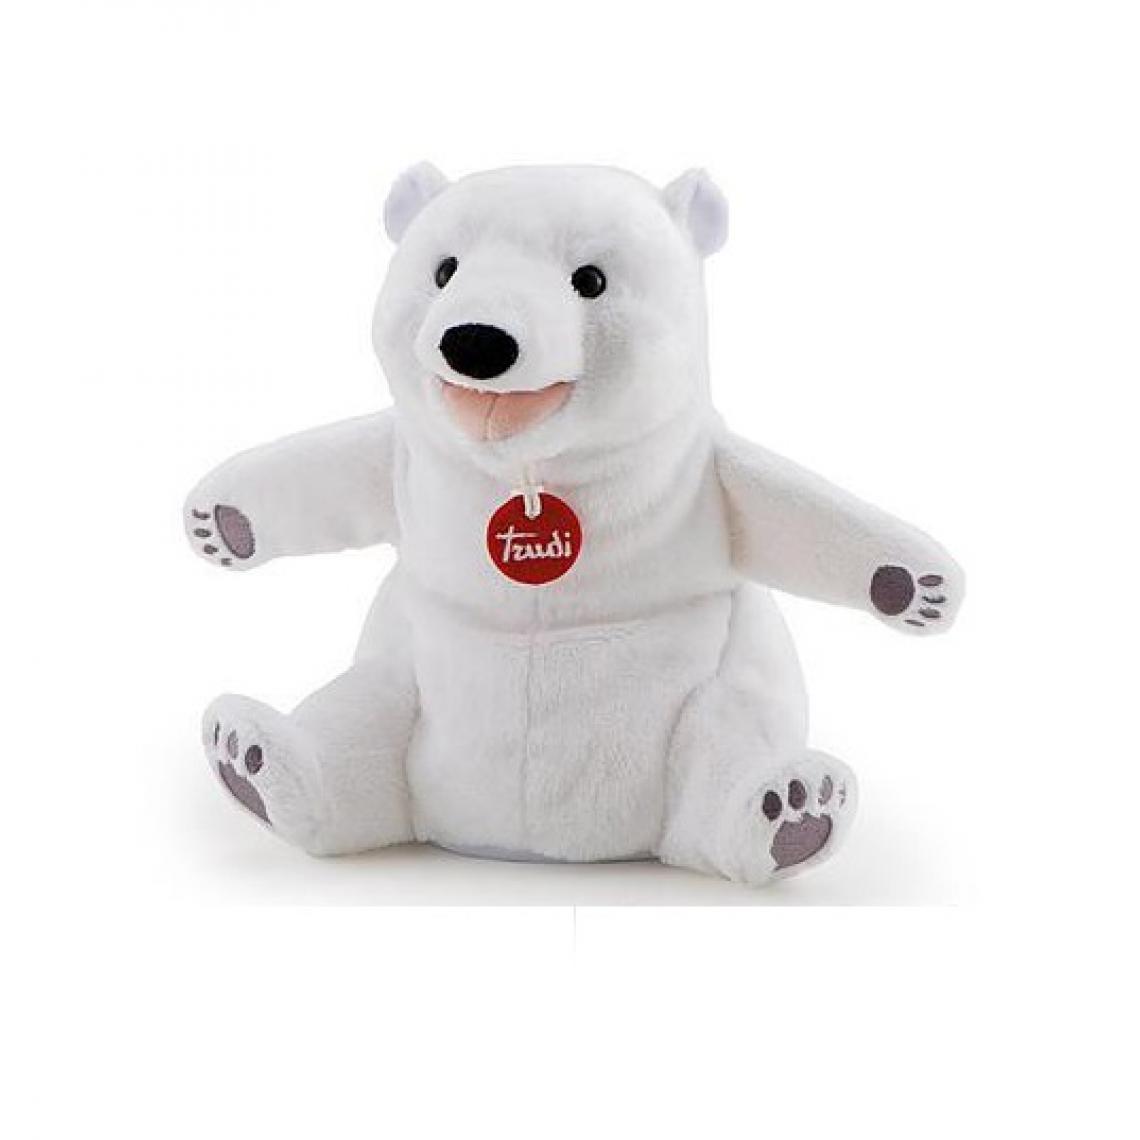 Trudi - Marionnette Main Ours Blanc - Peluches interactives